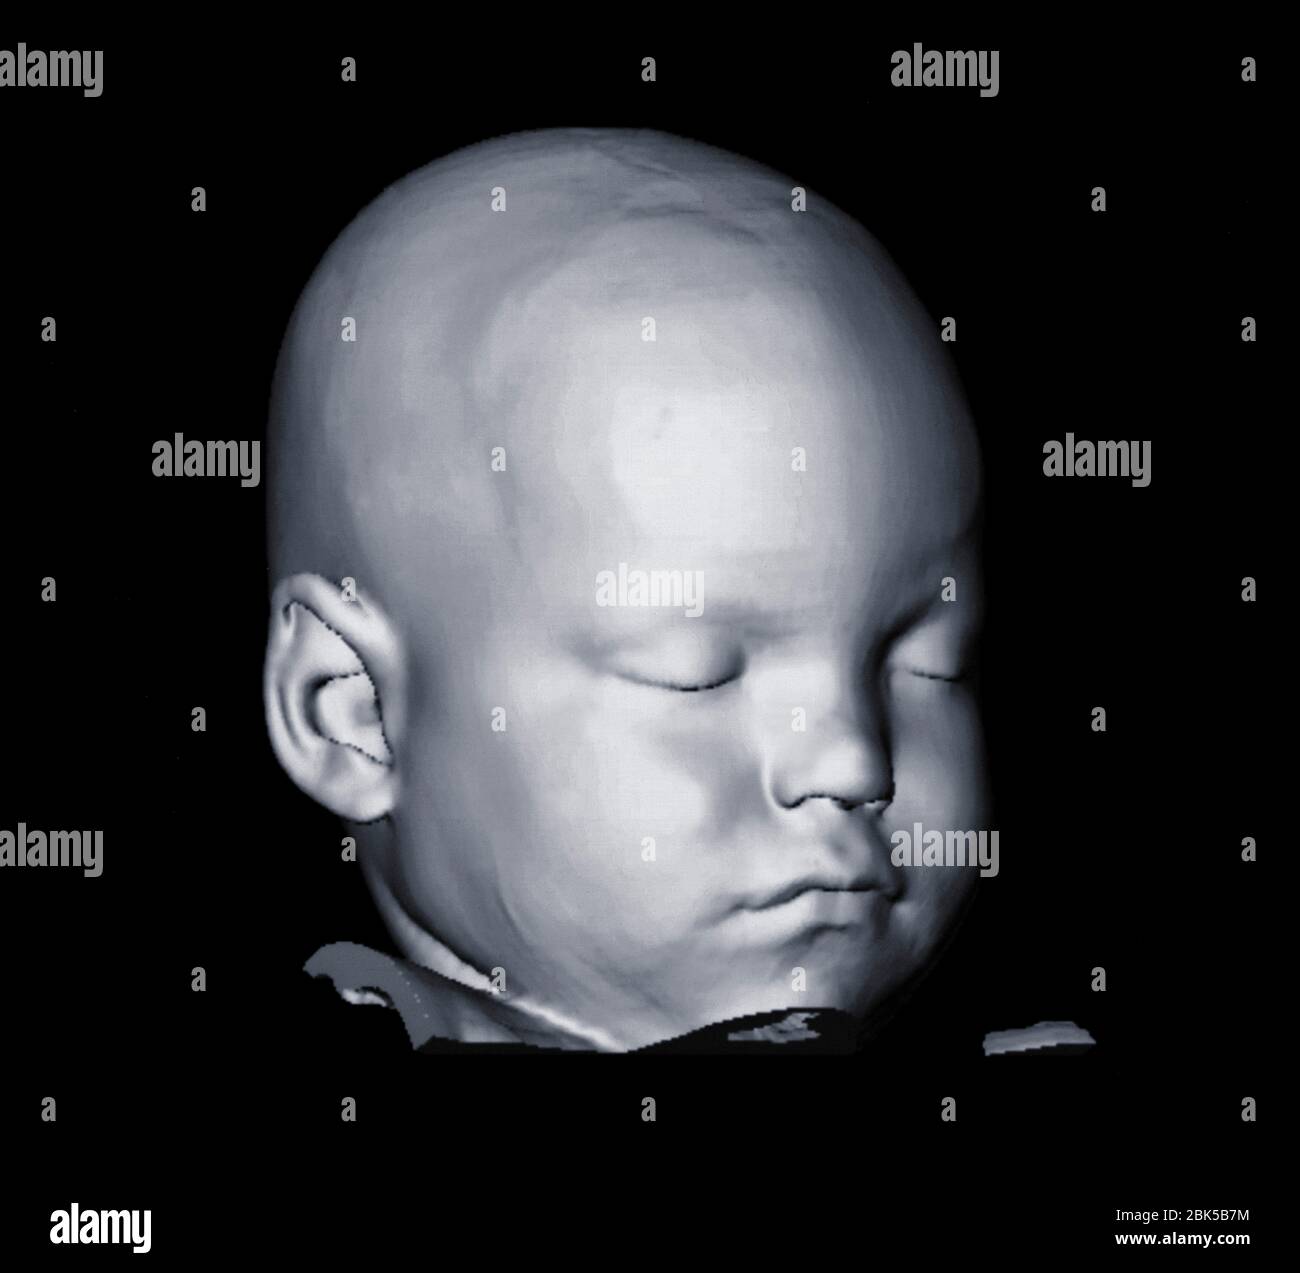 Image of baby's head, computed tomography (CT) scan. Stock Photo